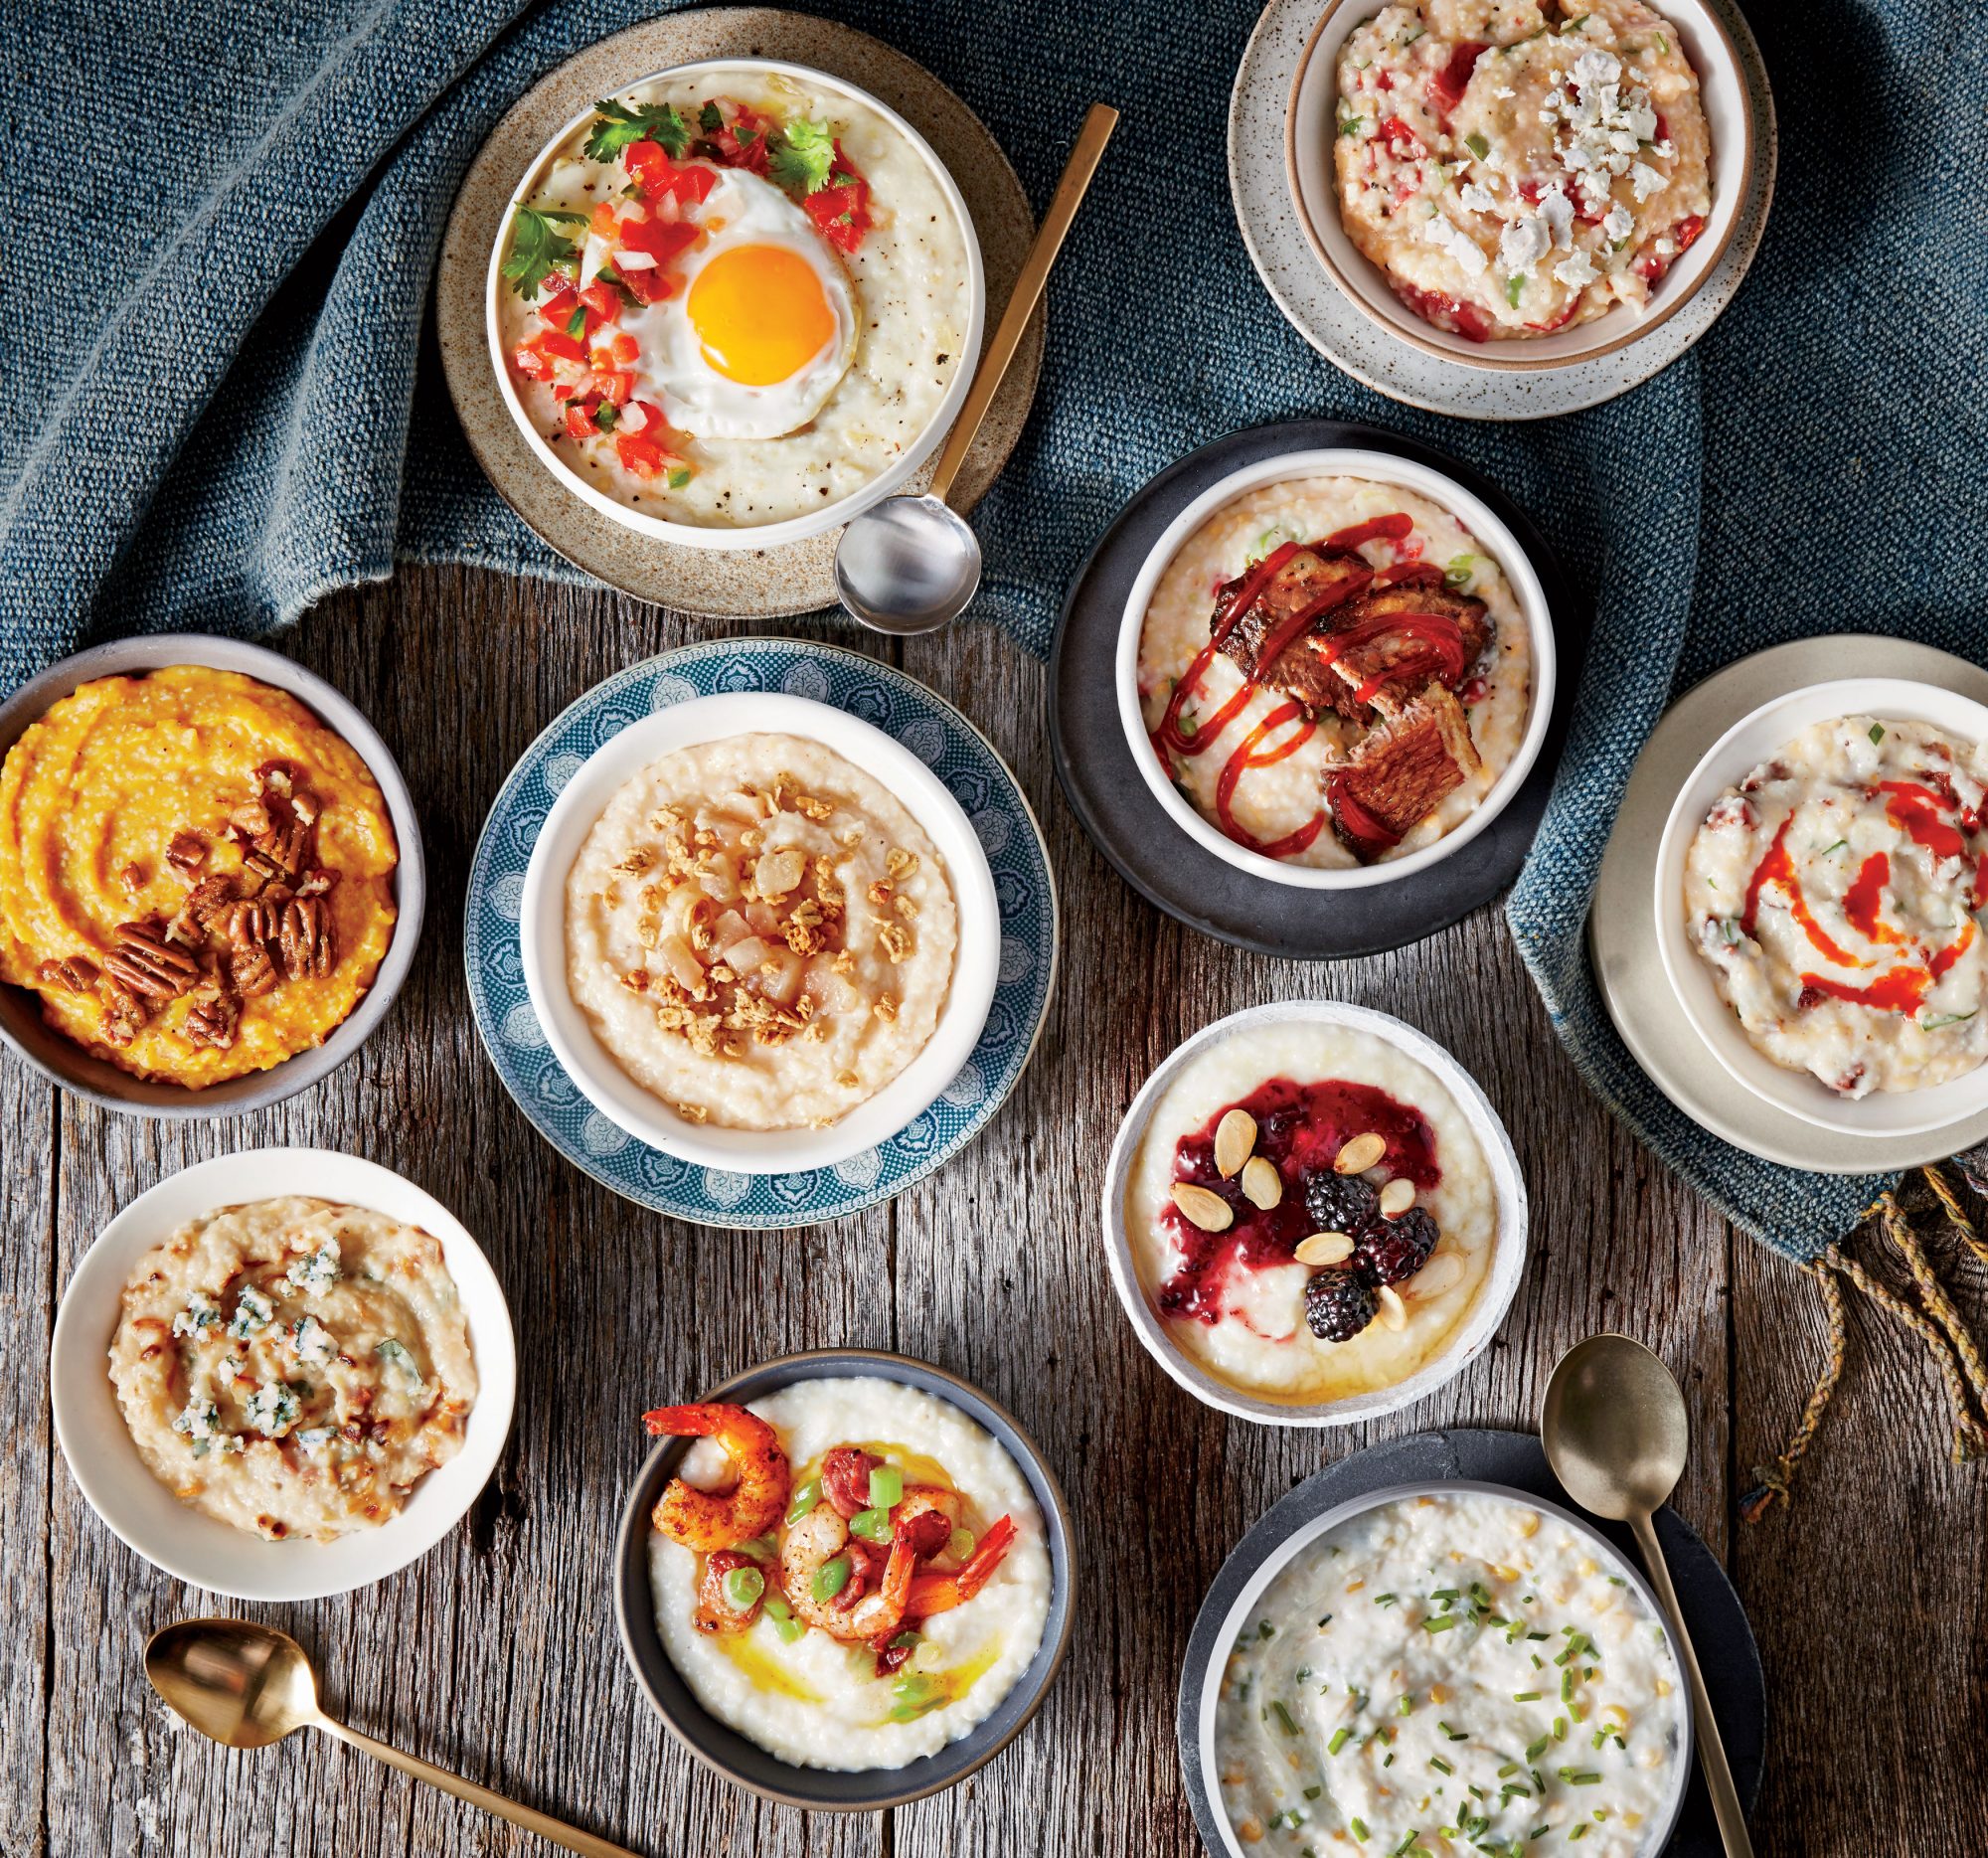 Hatch Chile Breakfast Bowl Grits 